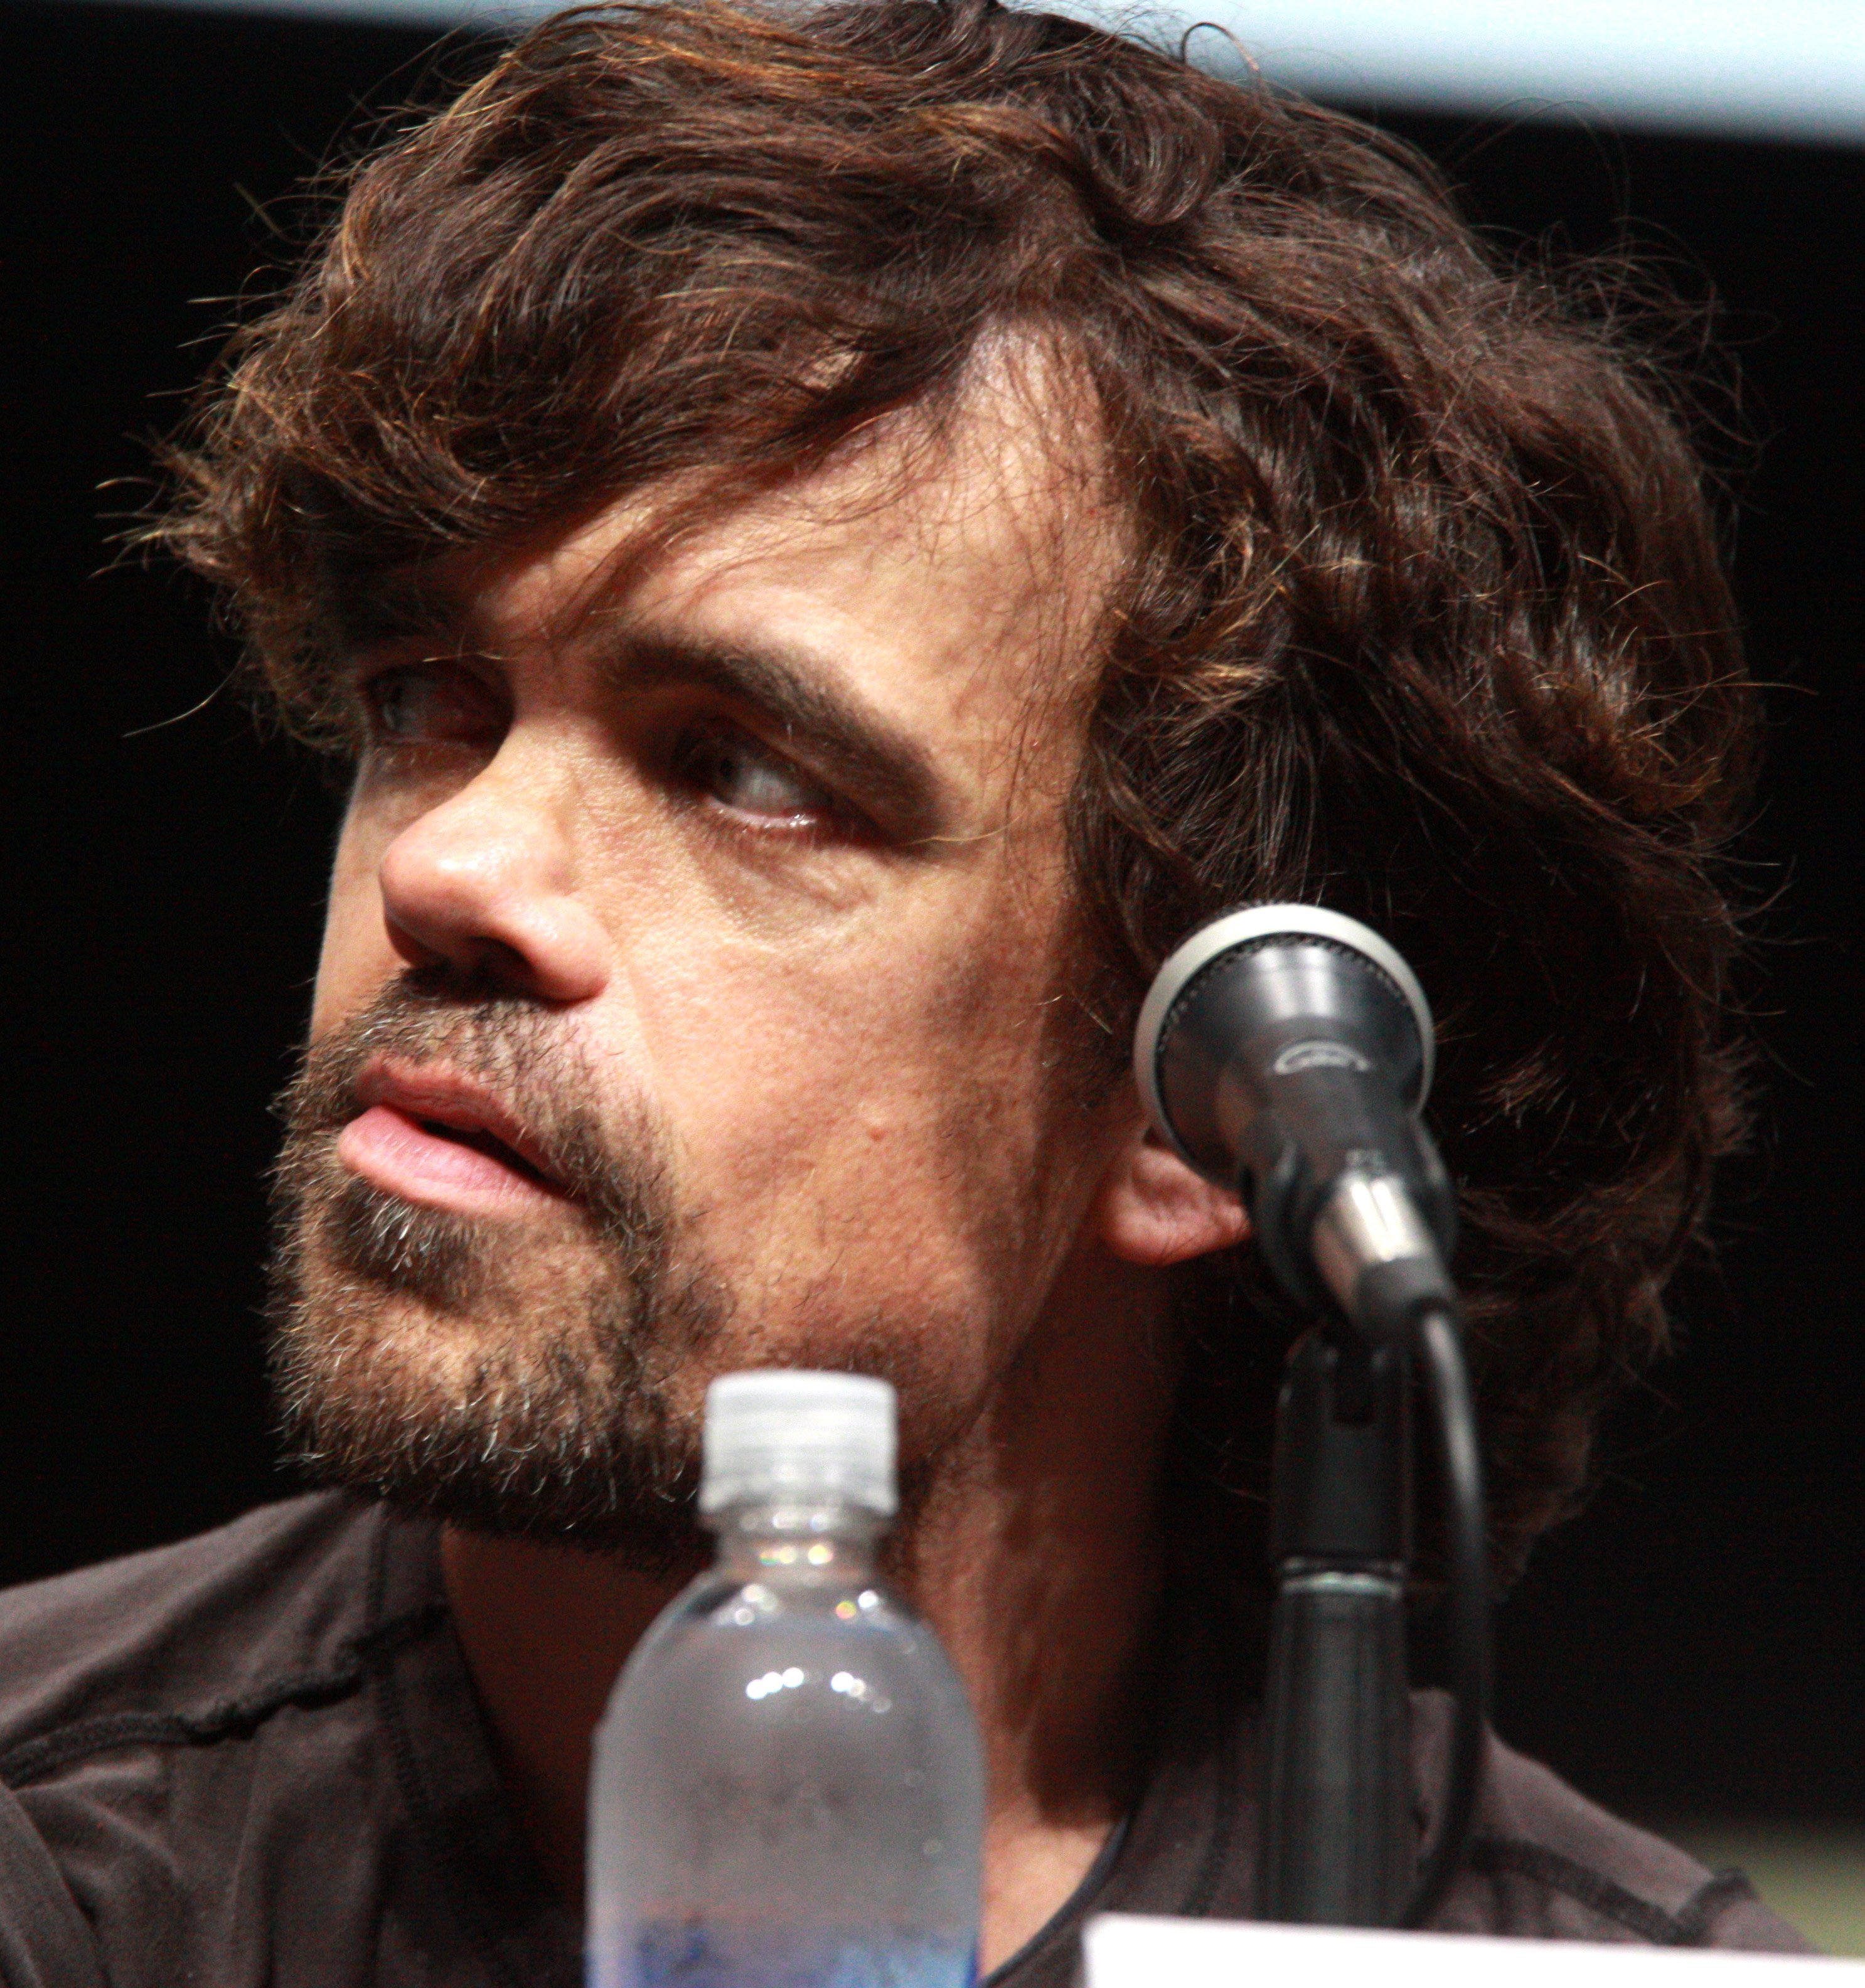 Peter Dinklage at the 2013 San Diego Comic-Con | Source: Wikimedia Commons Images, CC BY-SA 2.0